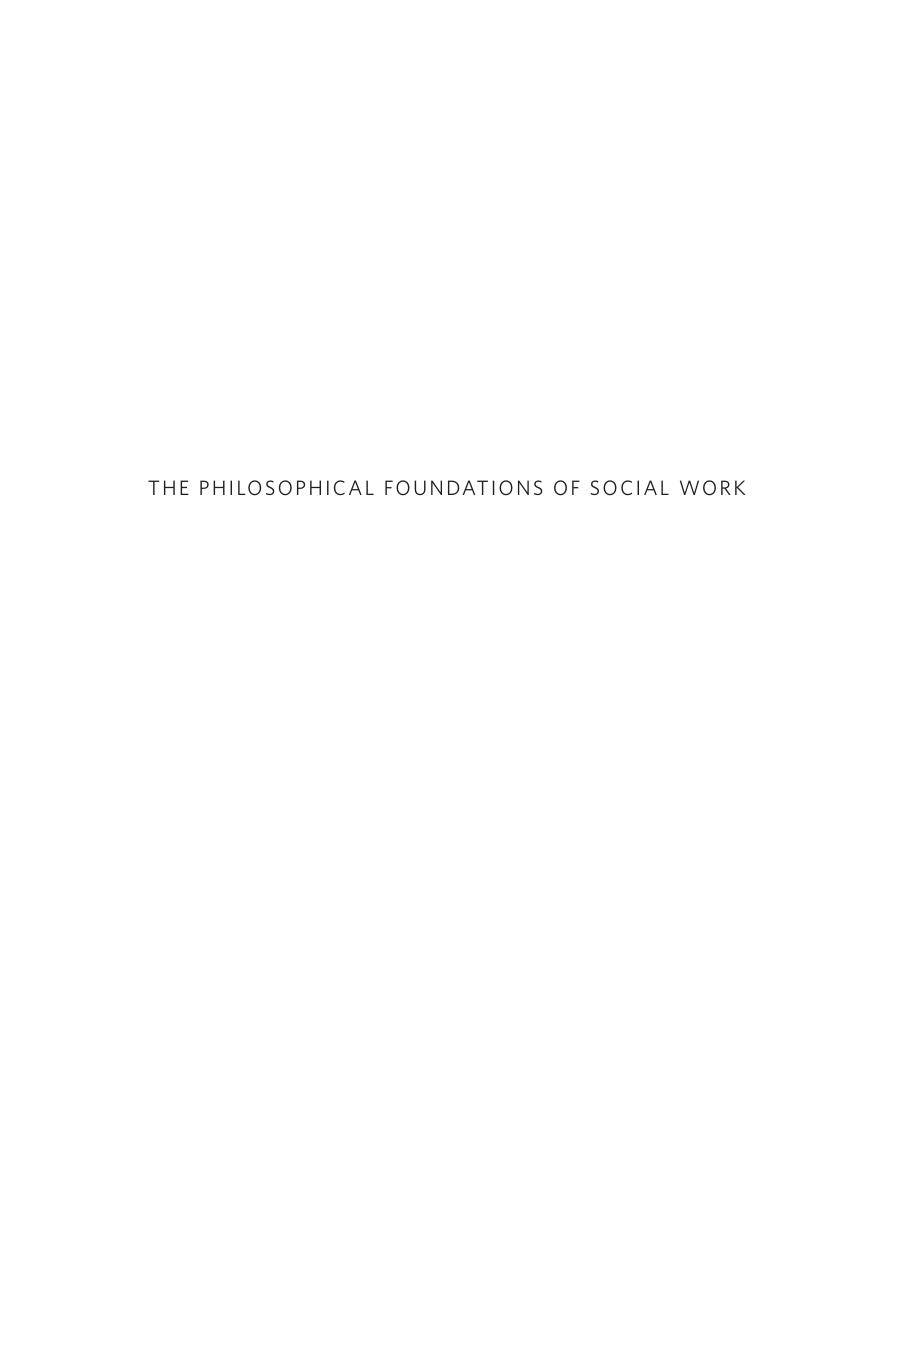 The Philosophical Foundations of Social Work by Frederic G. Reamer